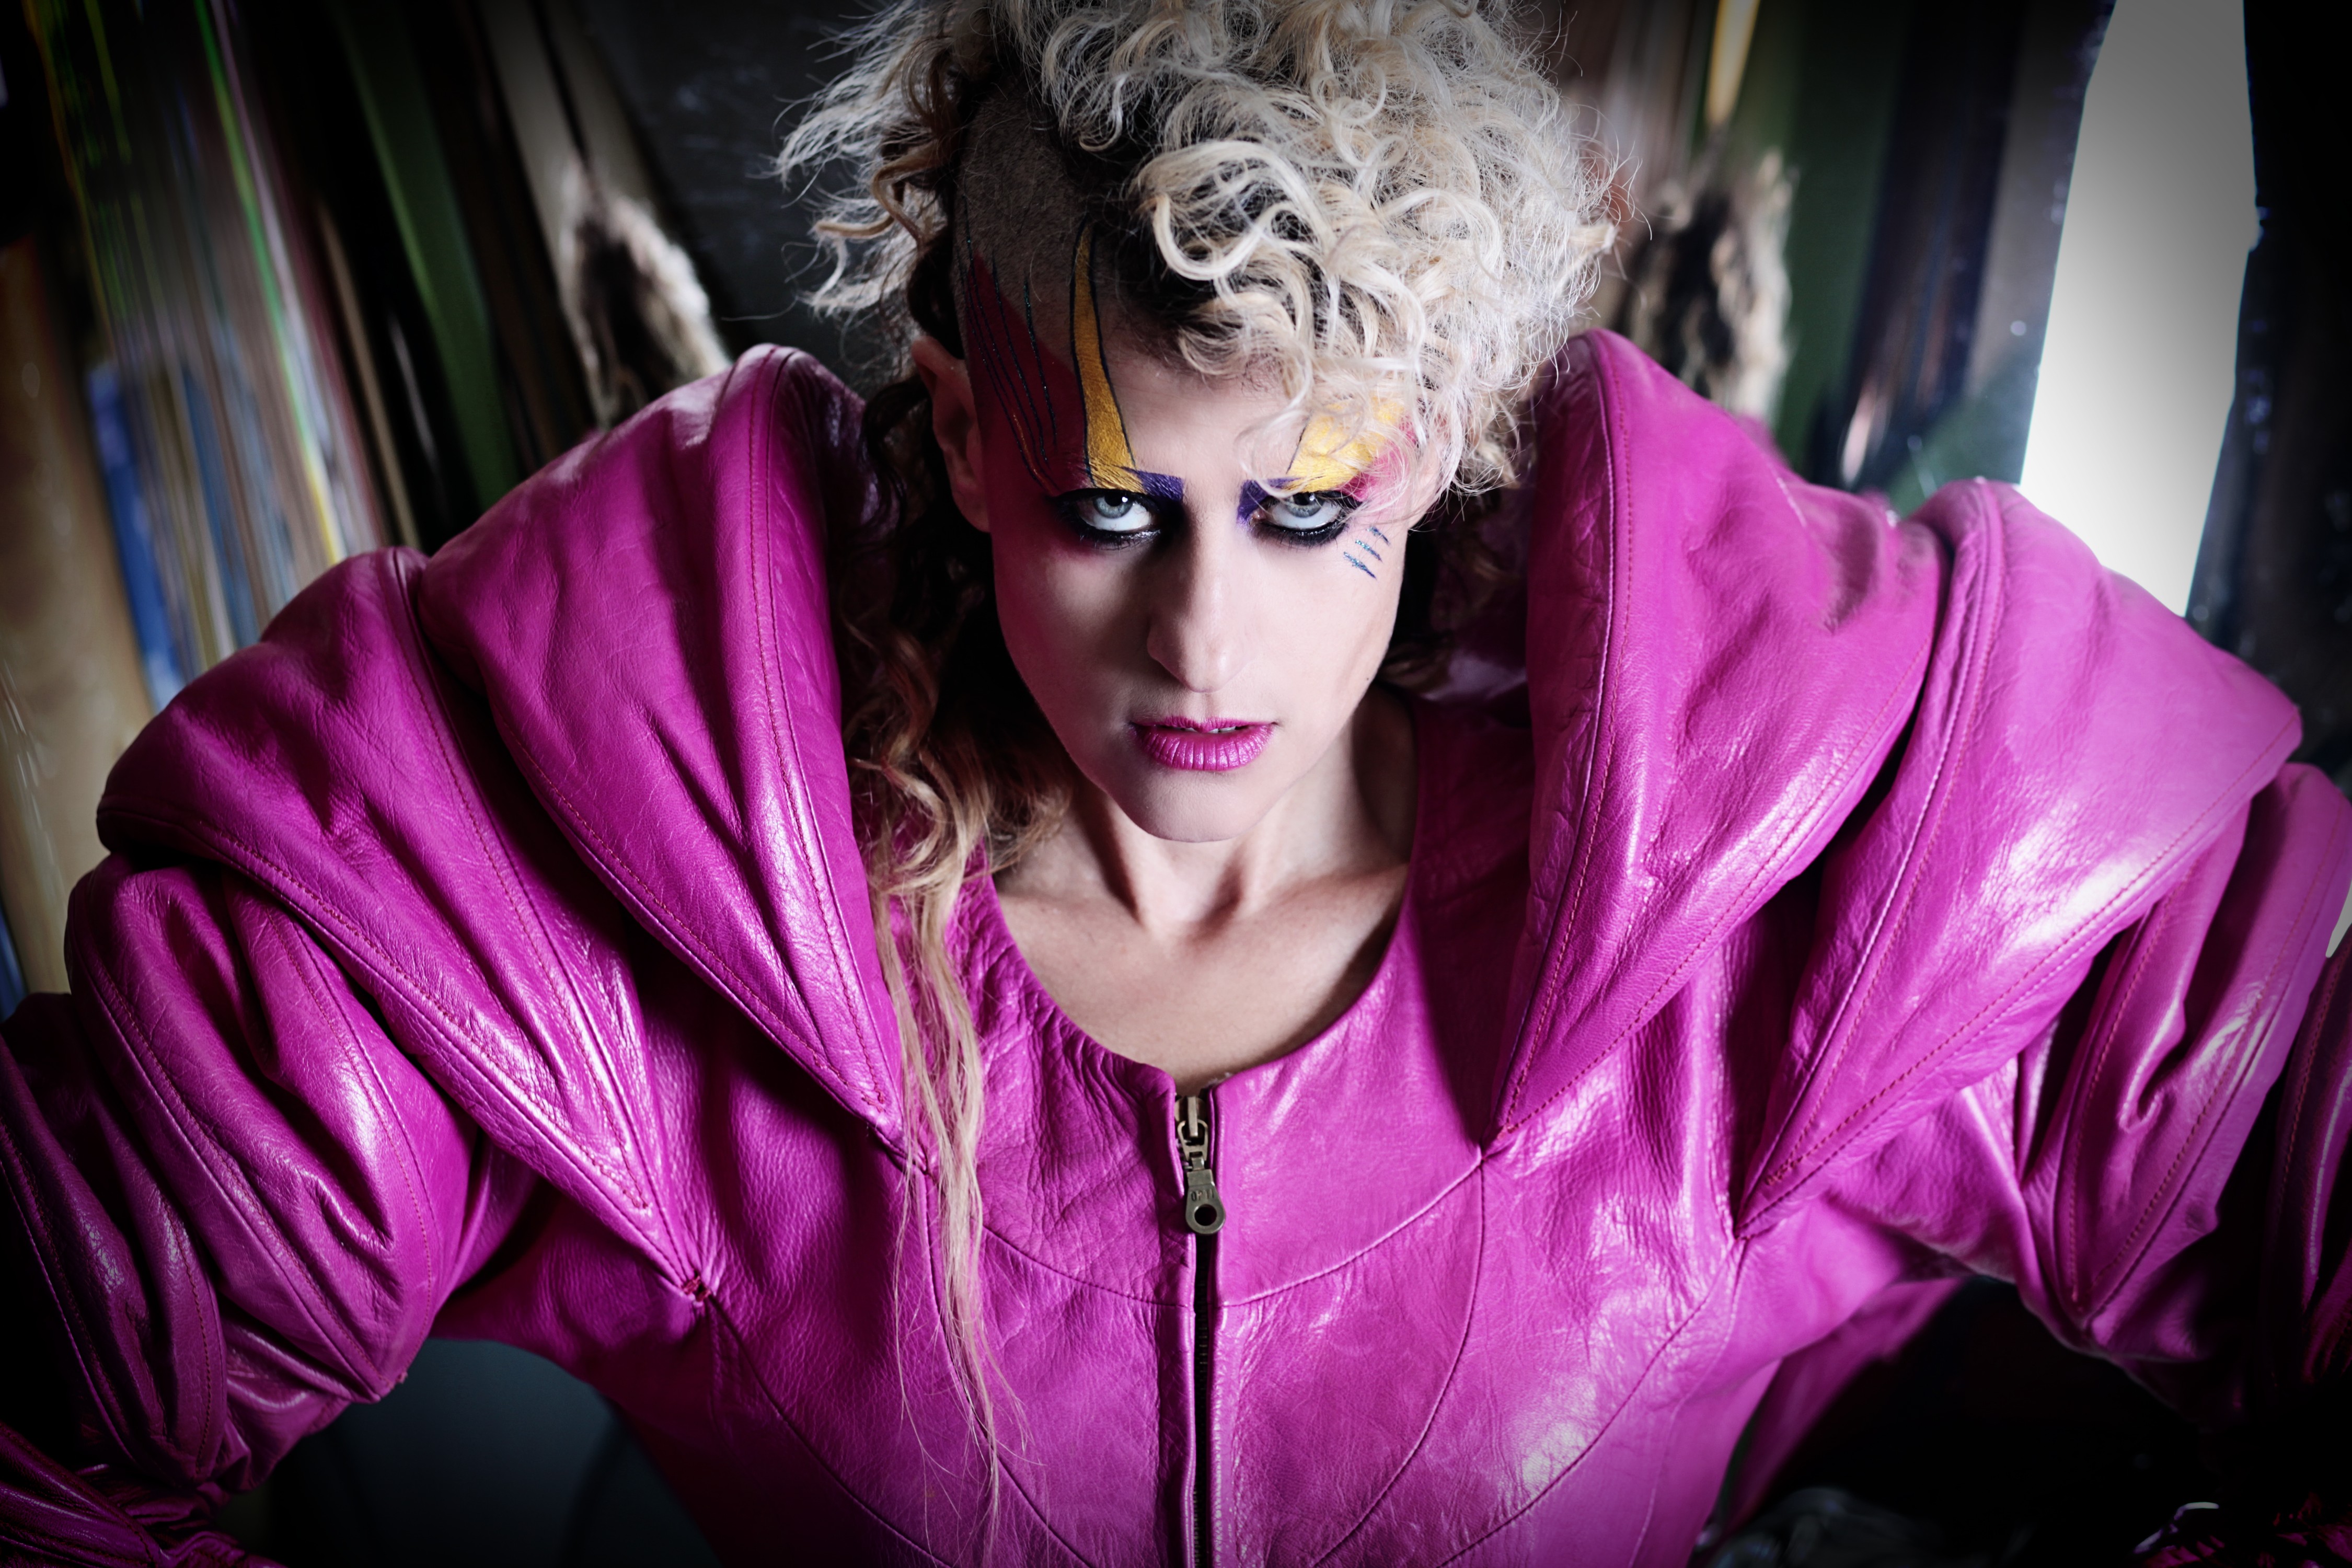 Peaches The Canadian singer, electronic musician and songwriter